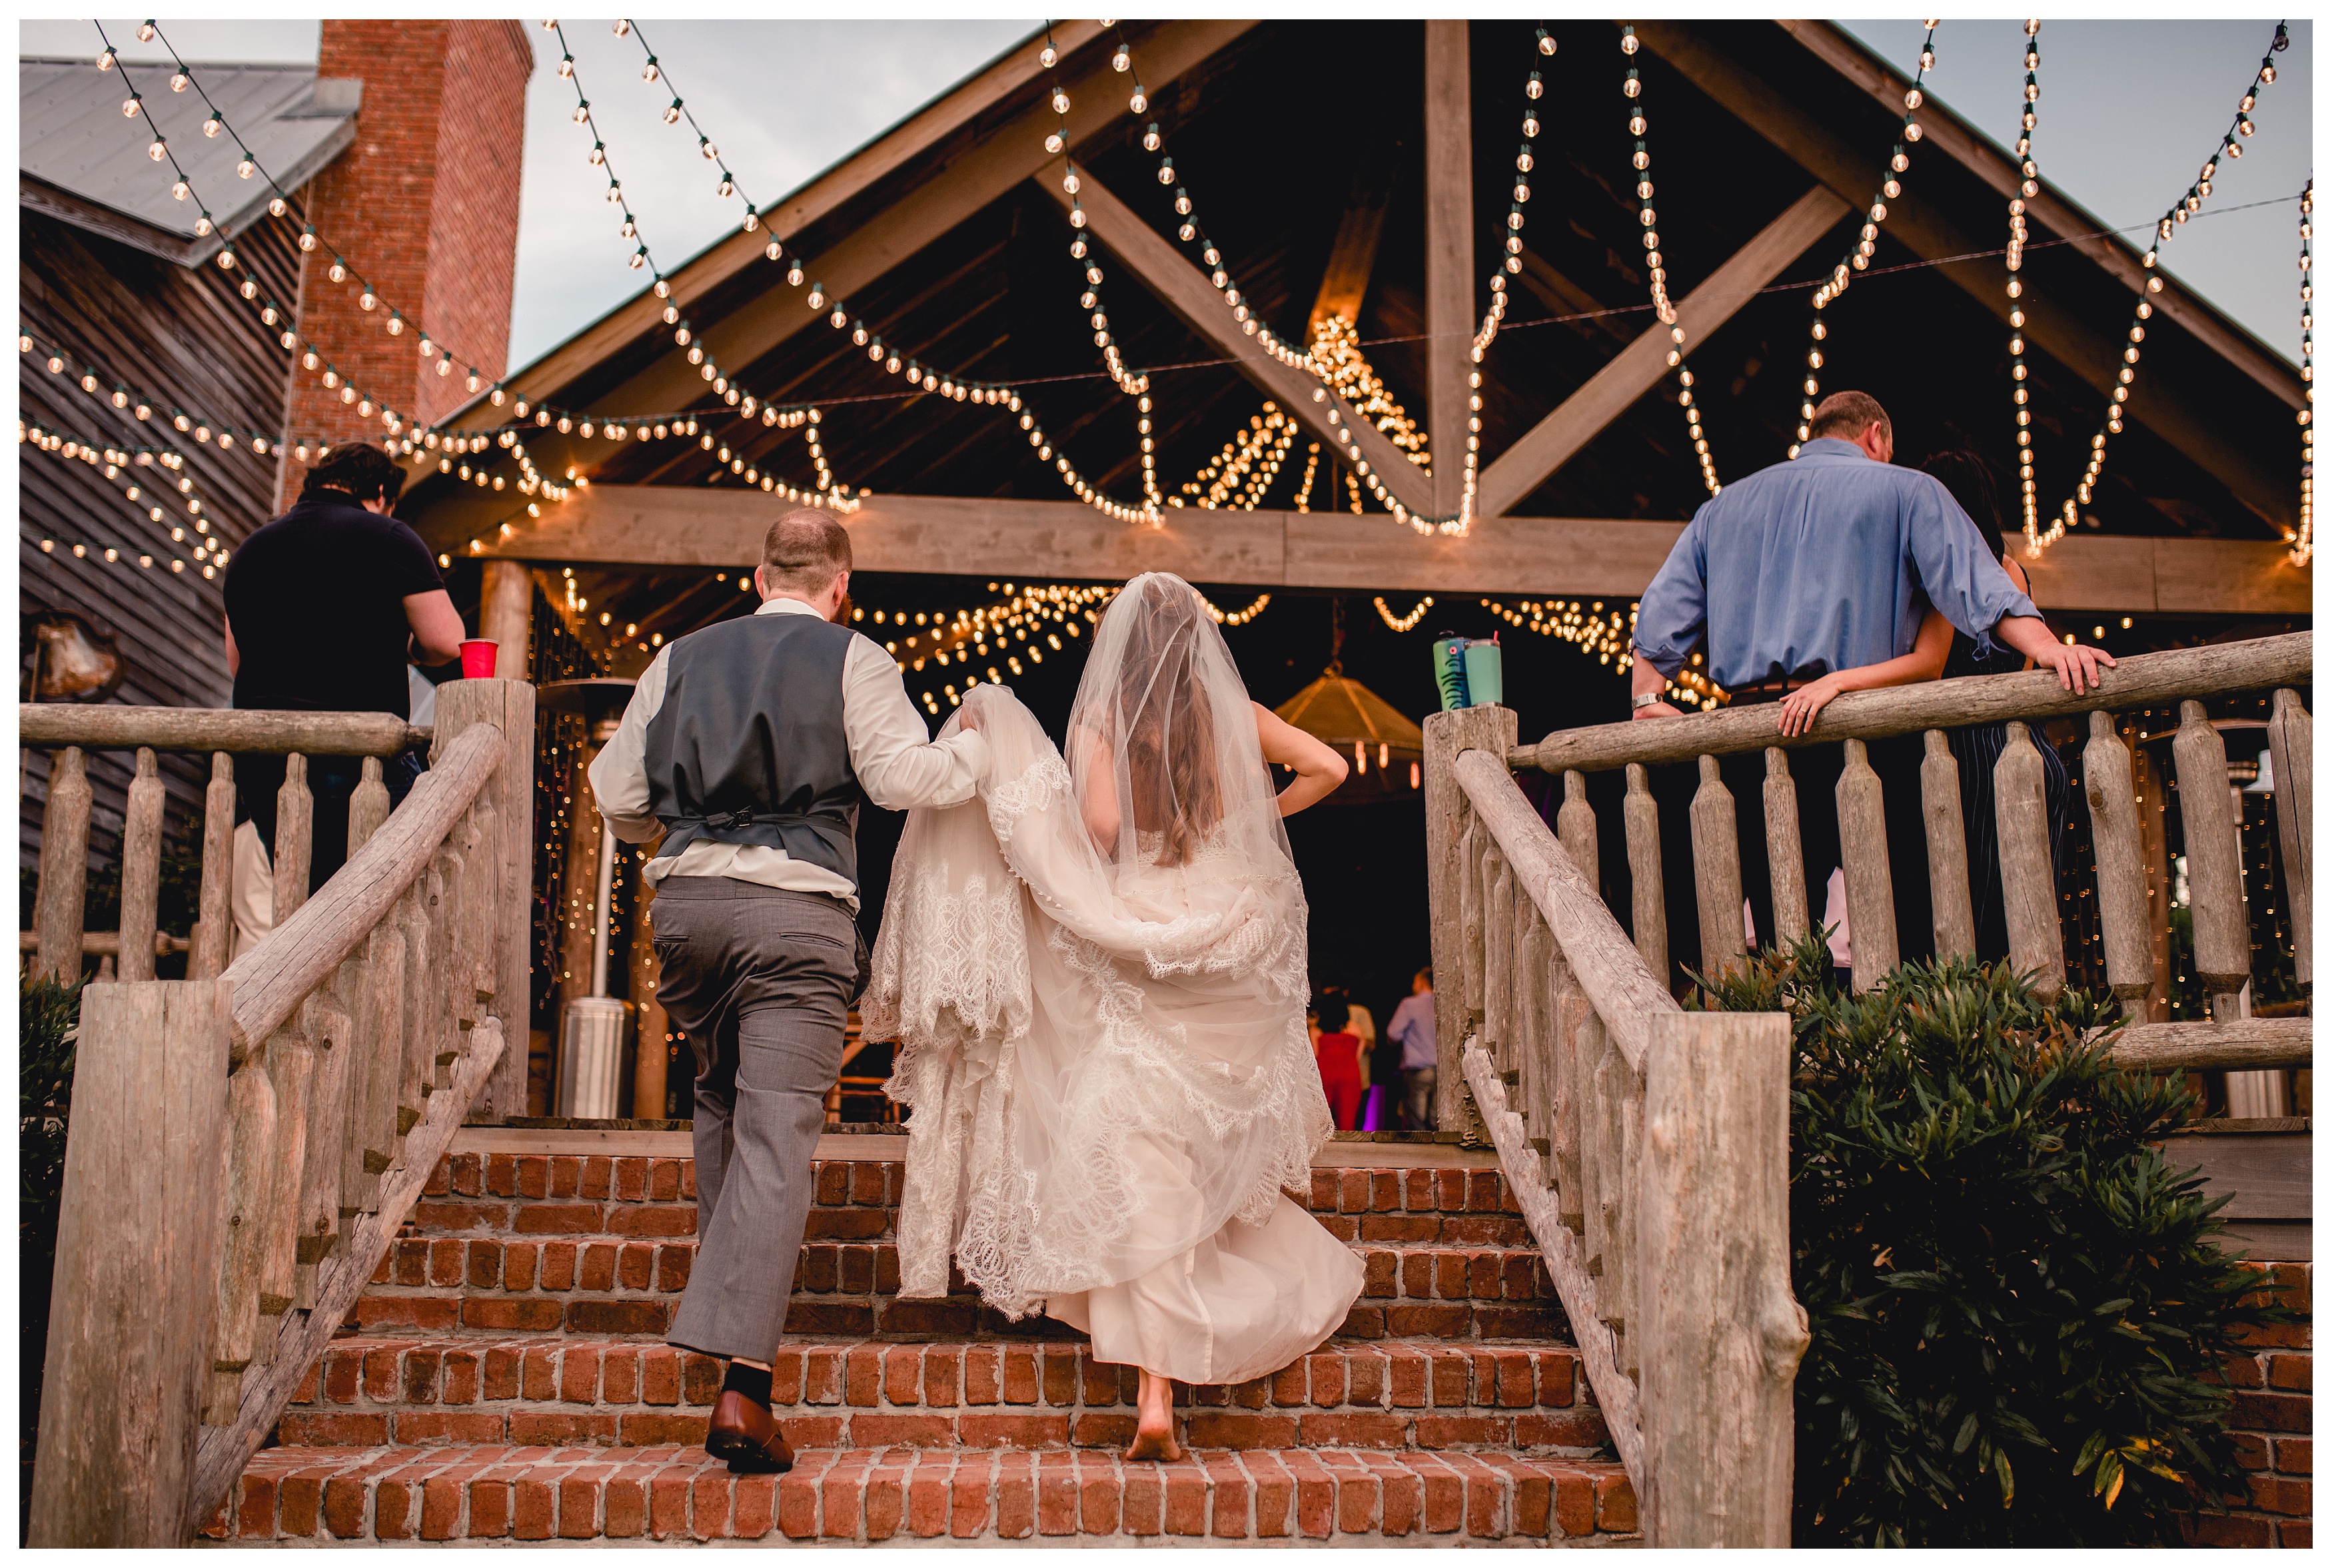 Documentary style moody wedding photographer in North Florida. Shelly Williams Photography